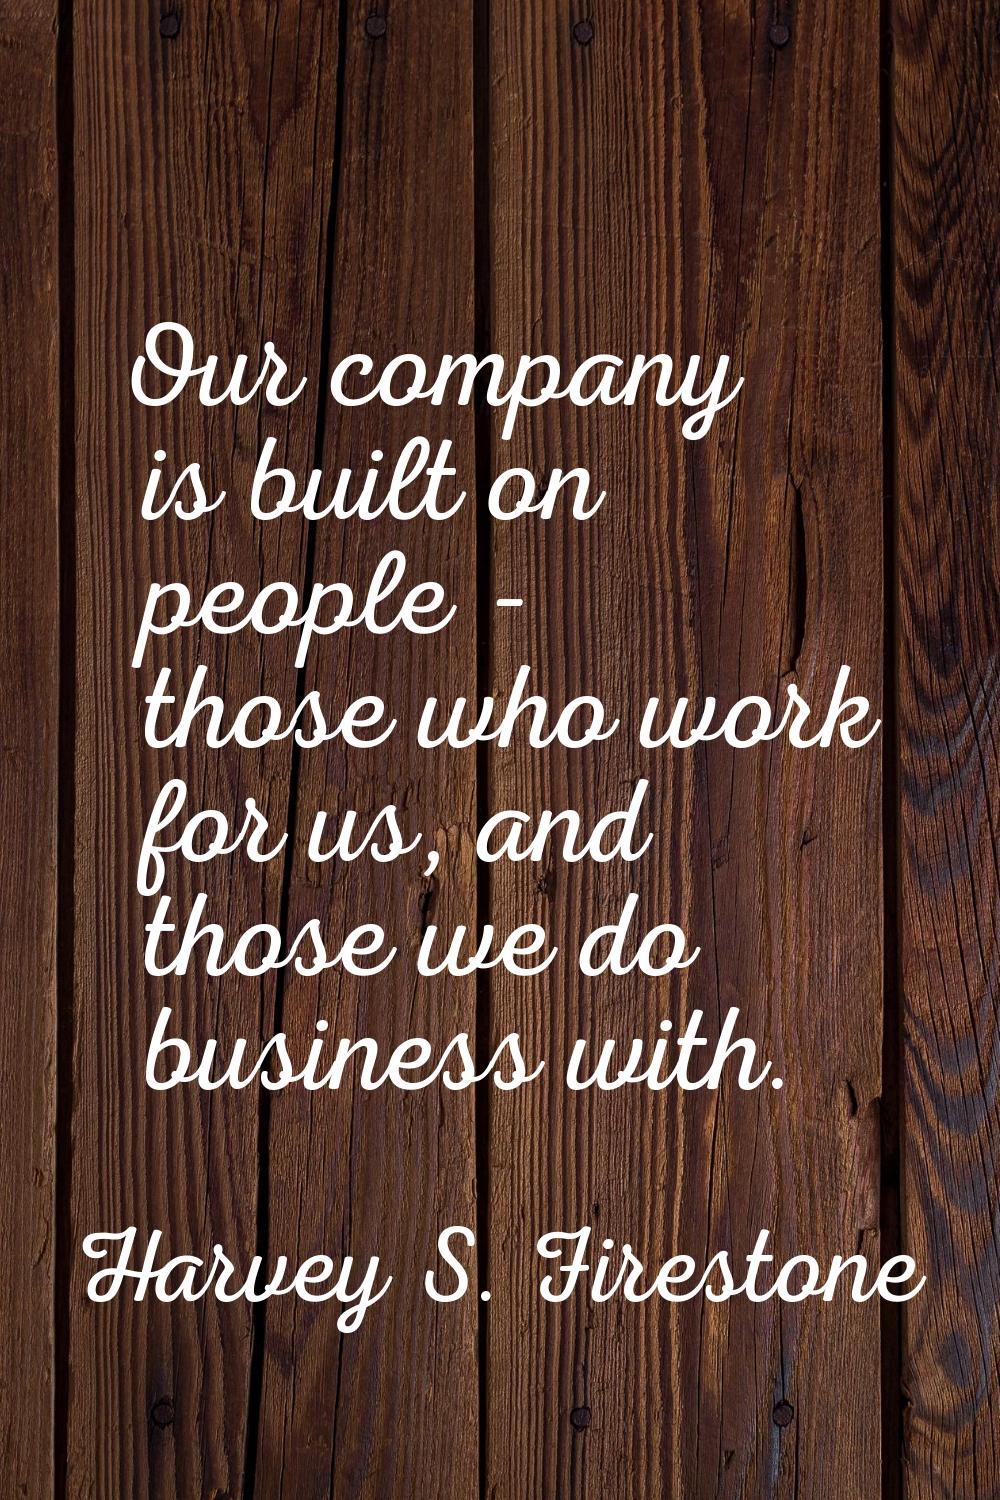 Our company is built on people - those who work for us, and those we do business with.